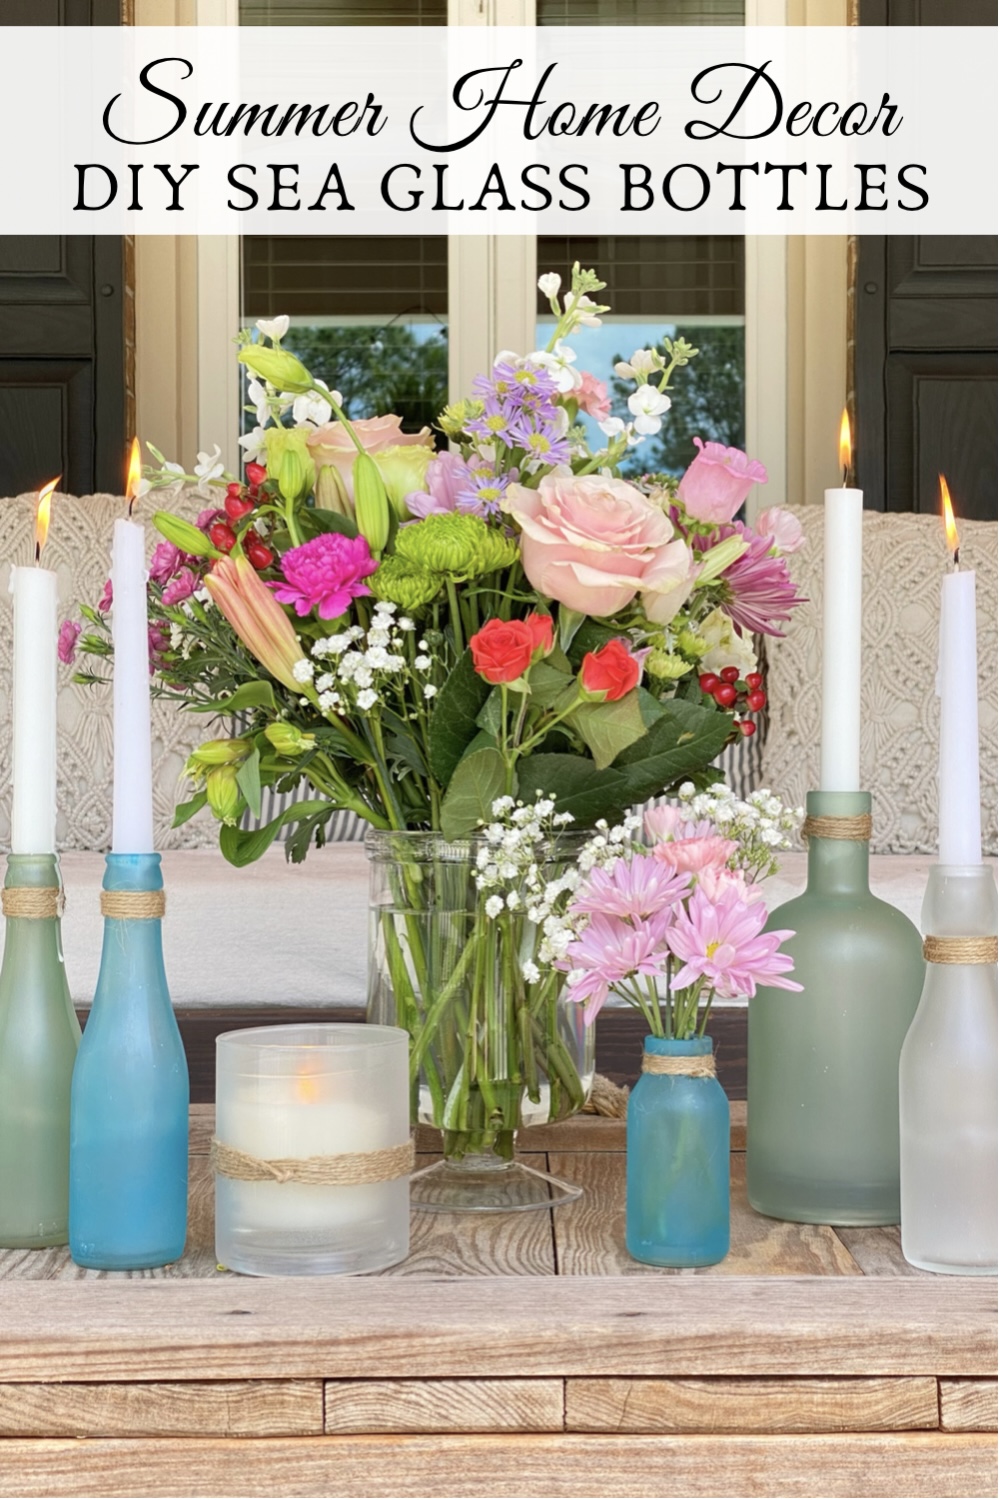 Pinterest Pin for DIY sea glass bottles styled onthe porch with fresh flowers and candles.